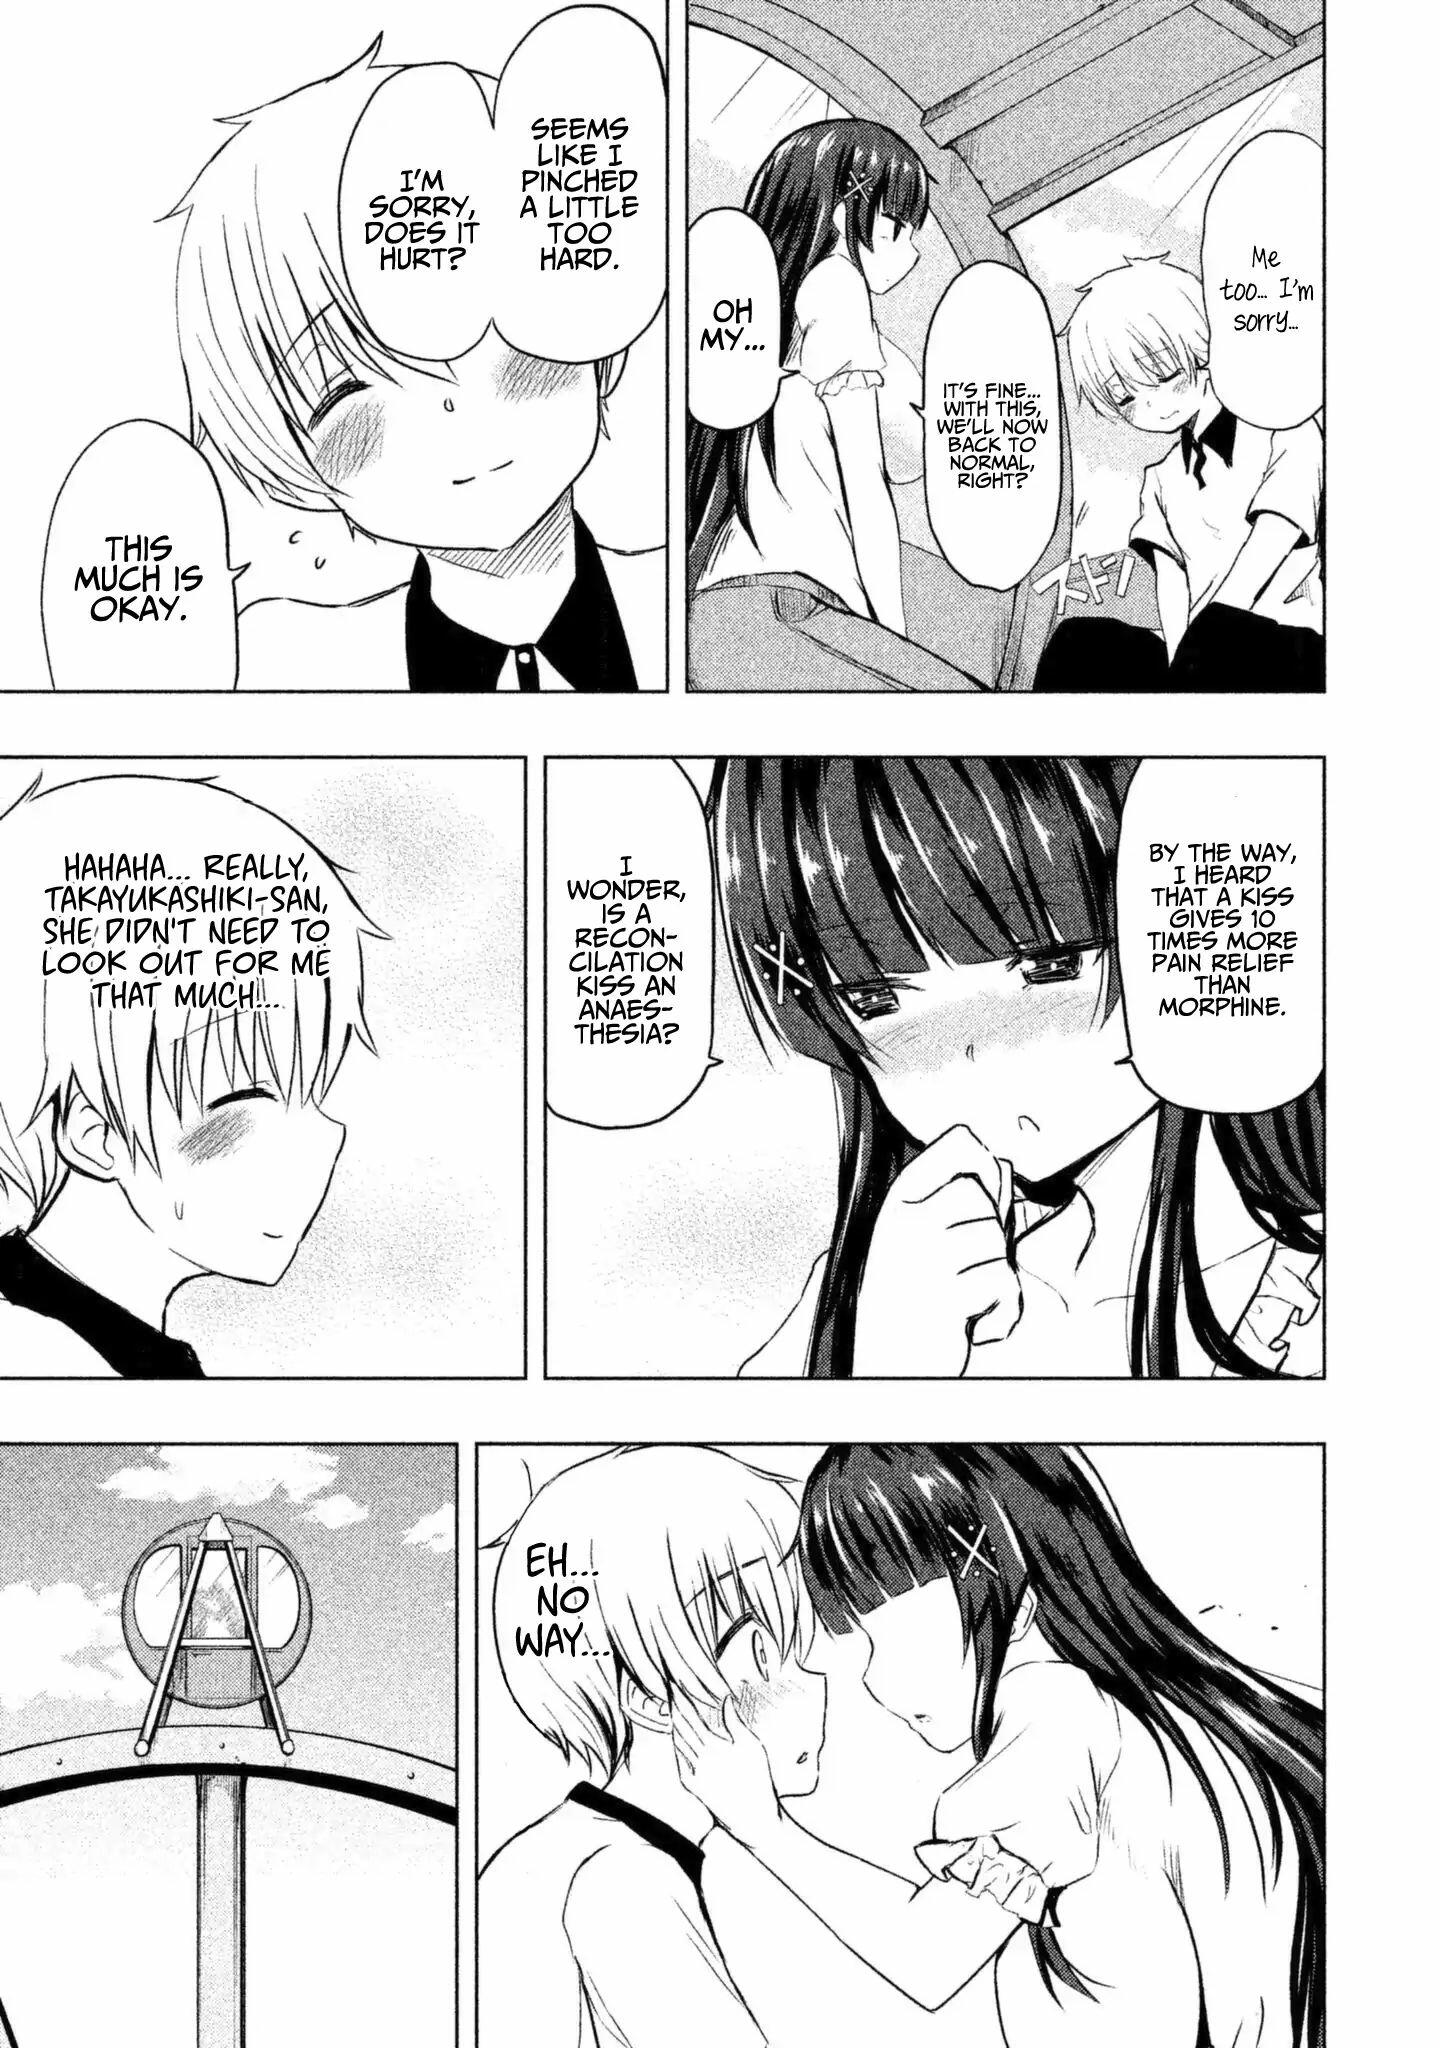 A Girl Who Is Very Well-Informed About Weird Knowledge, Takayukashiki Souko-San Vol.1 Chapter 8: Distance page 8 - Mangakakalots.com